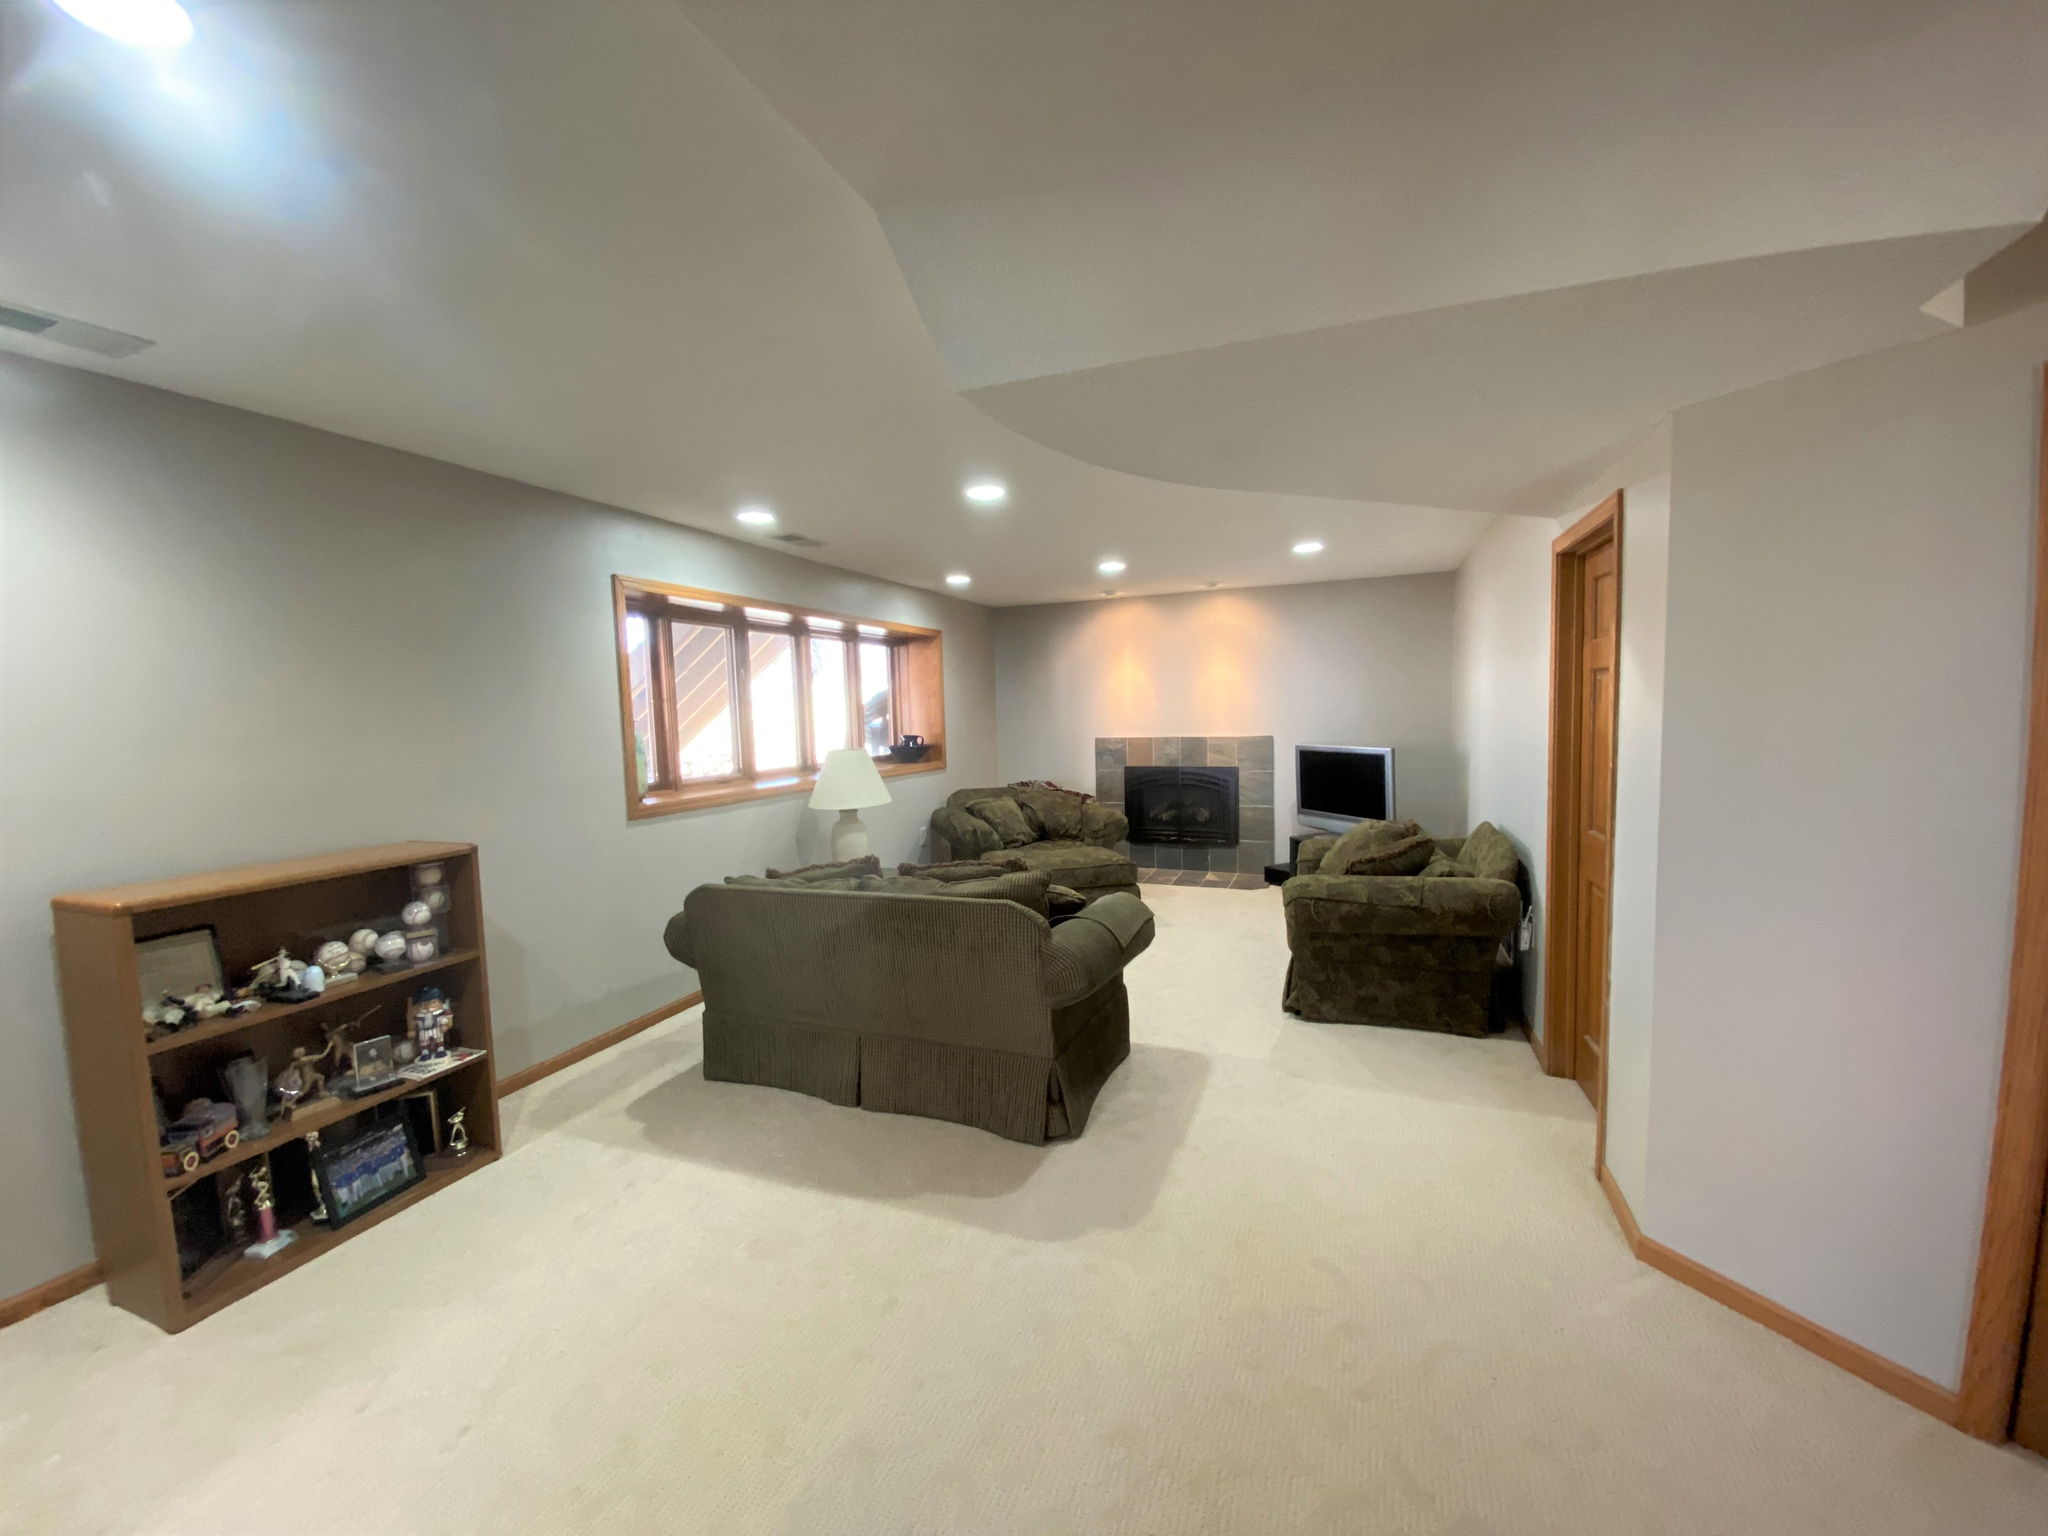  12300 30th Ave. No., Plymouth, MN 55441, US Photo 16